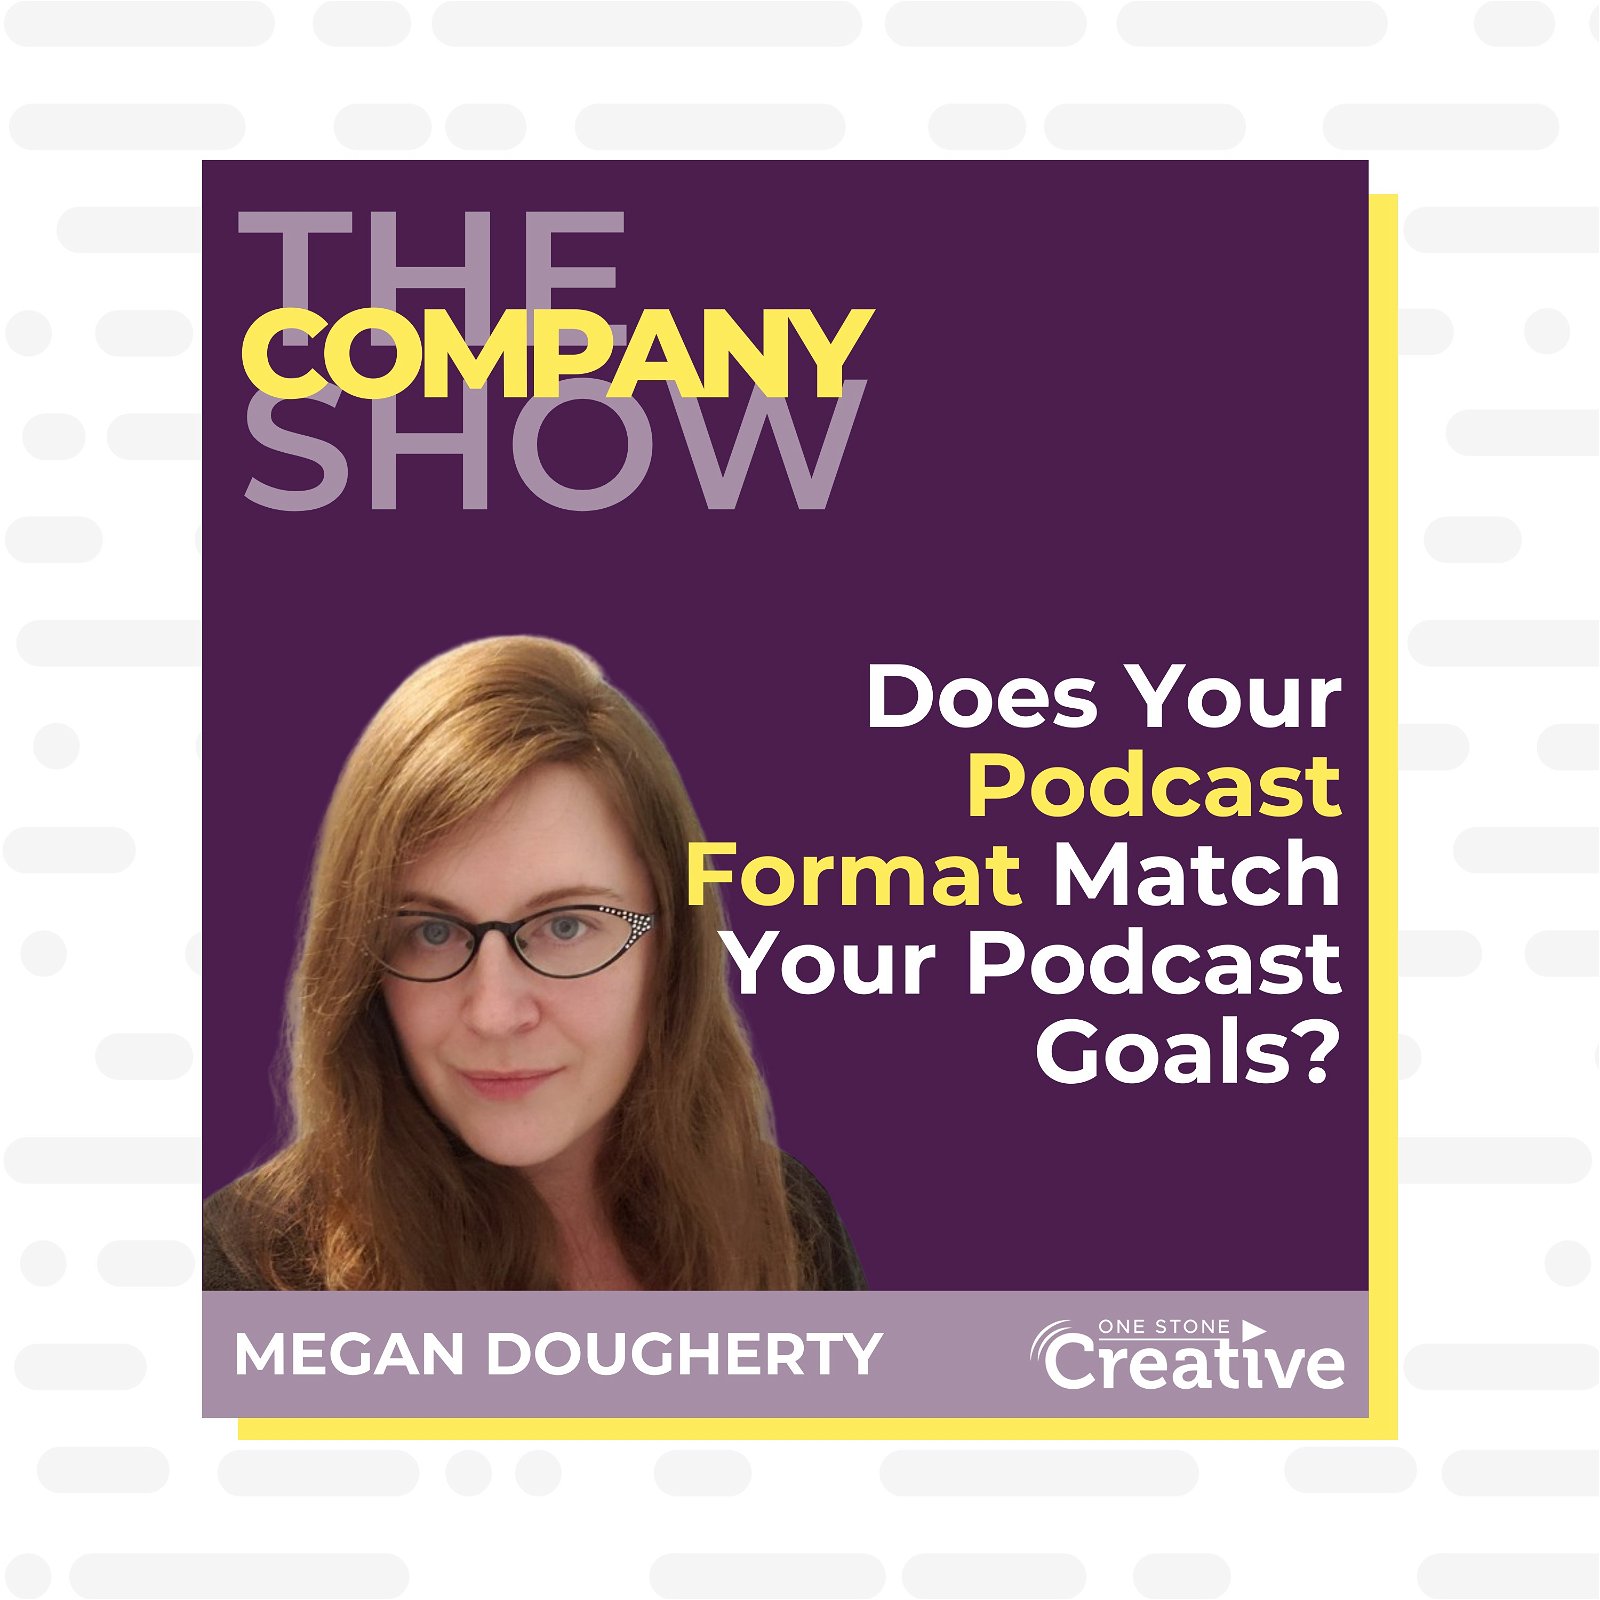 Does Your Podcast Format Match Your Podcast Goals?